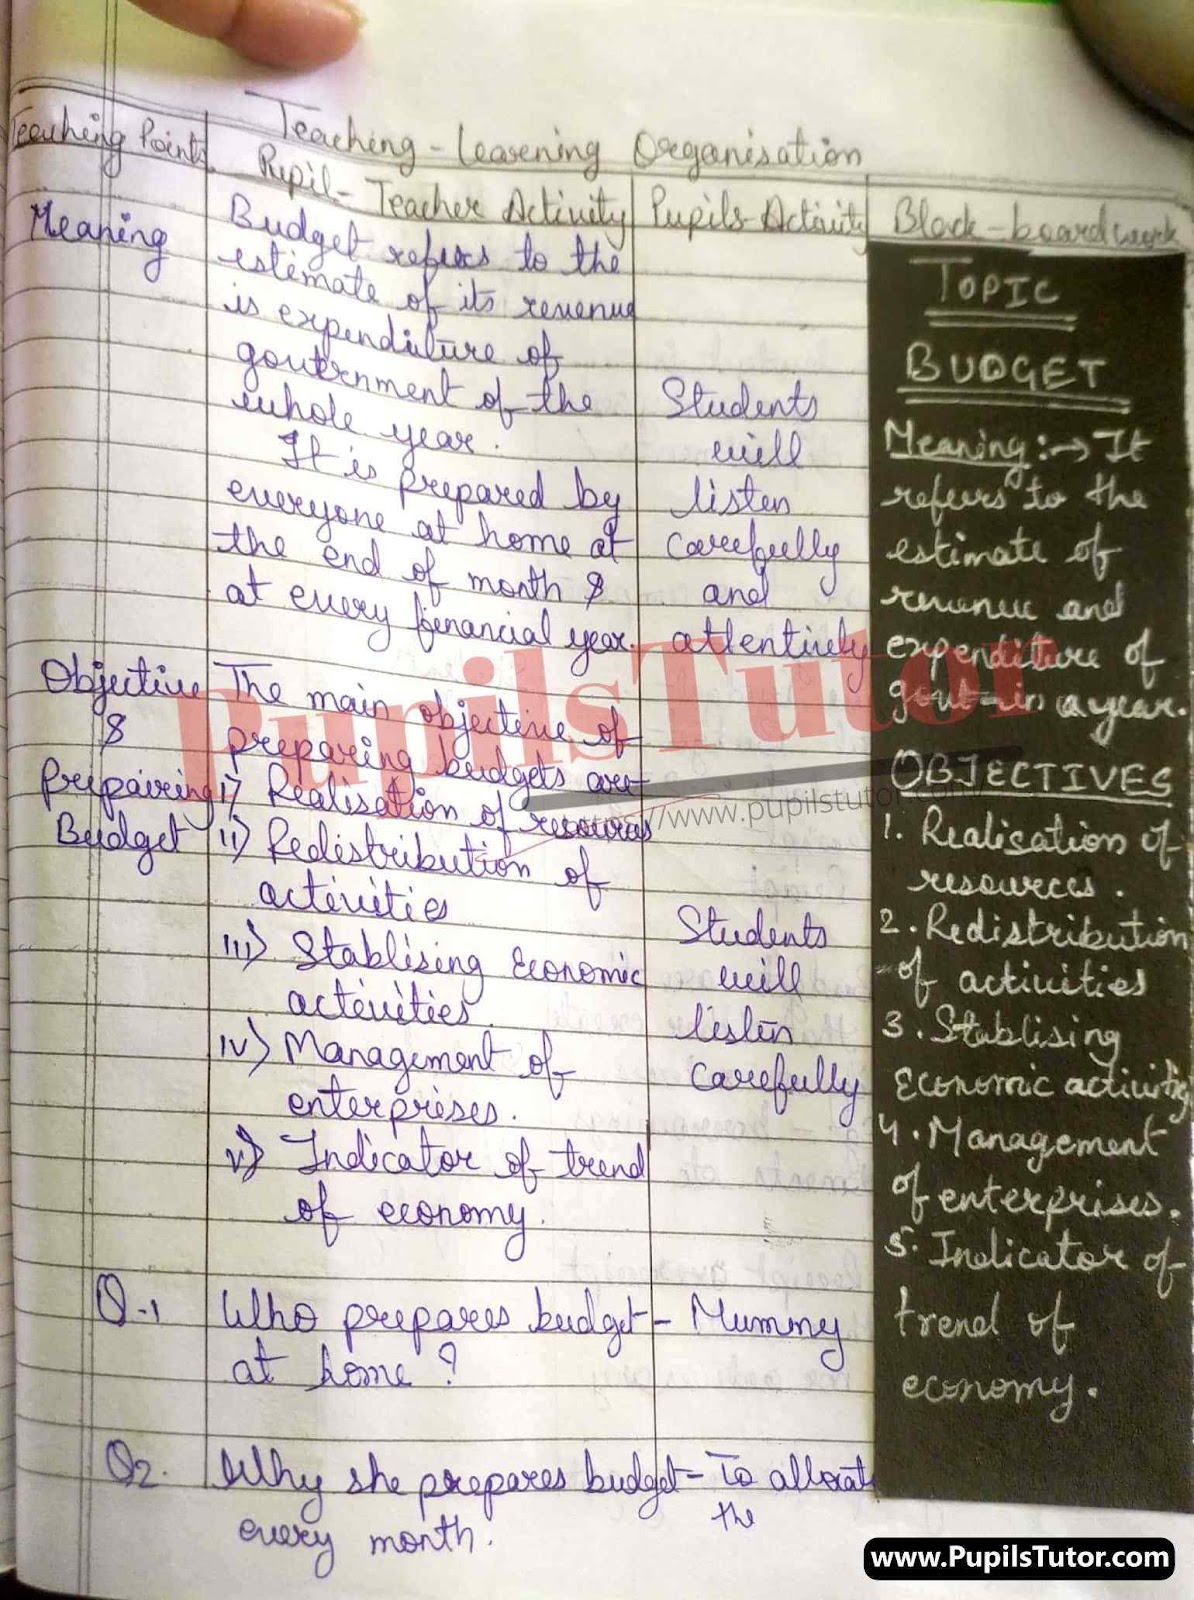 Class/Grade 9 To 12 Commerce And Business Studies Lesson Plan On Budget And Its Preparation For CBSE NCERT KVS School And University College Teachers – (Page And Image Number 3) – www.pupilstutor.com